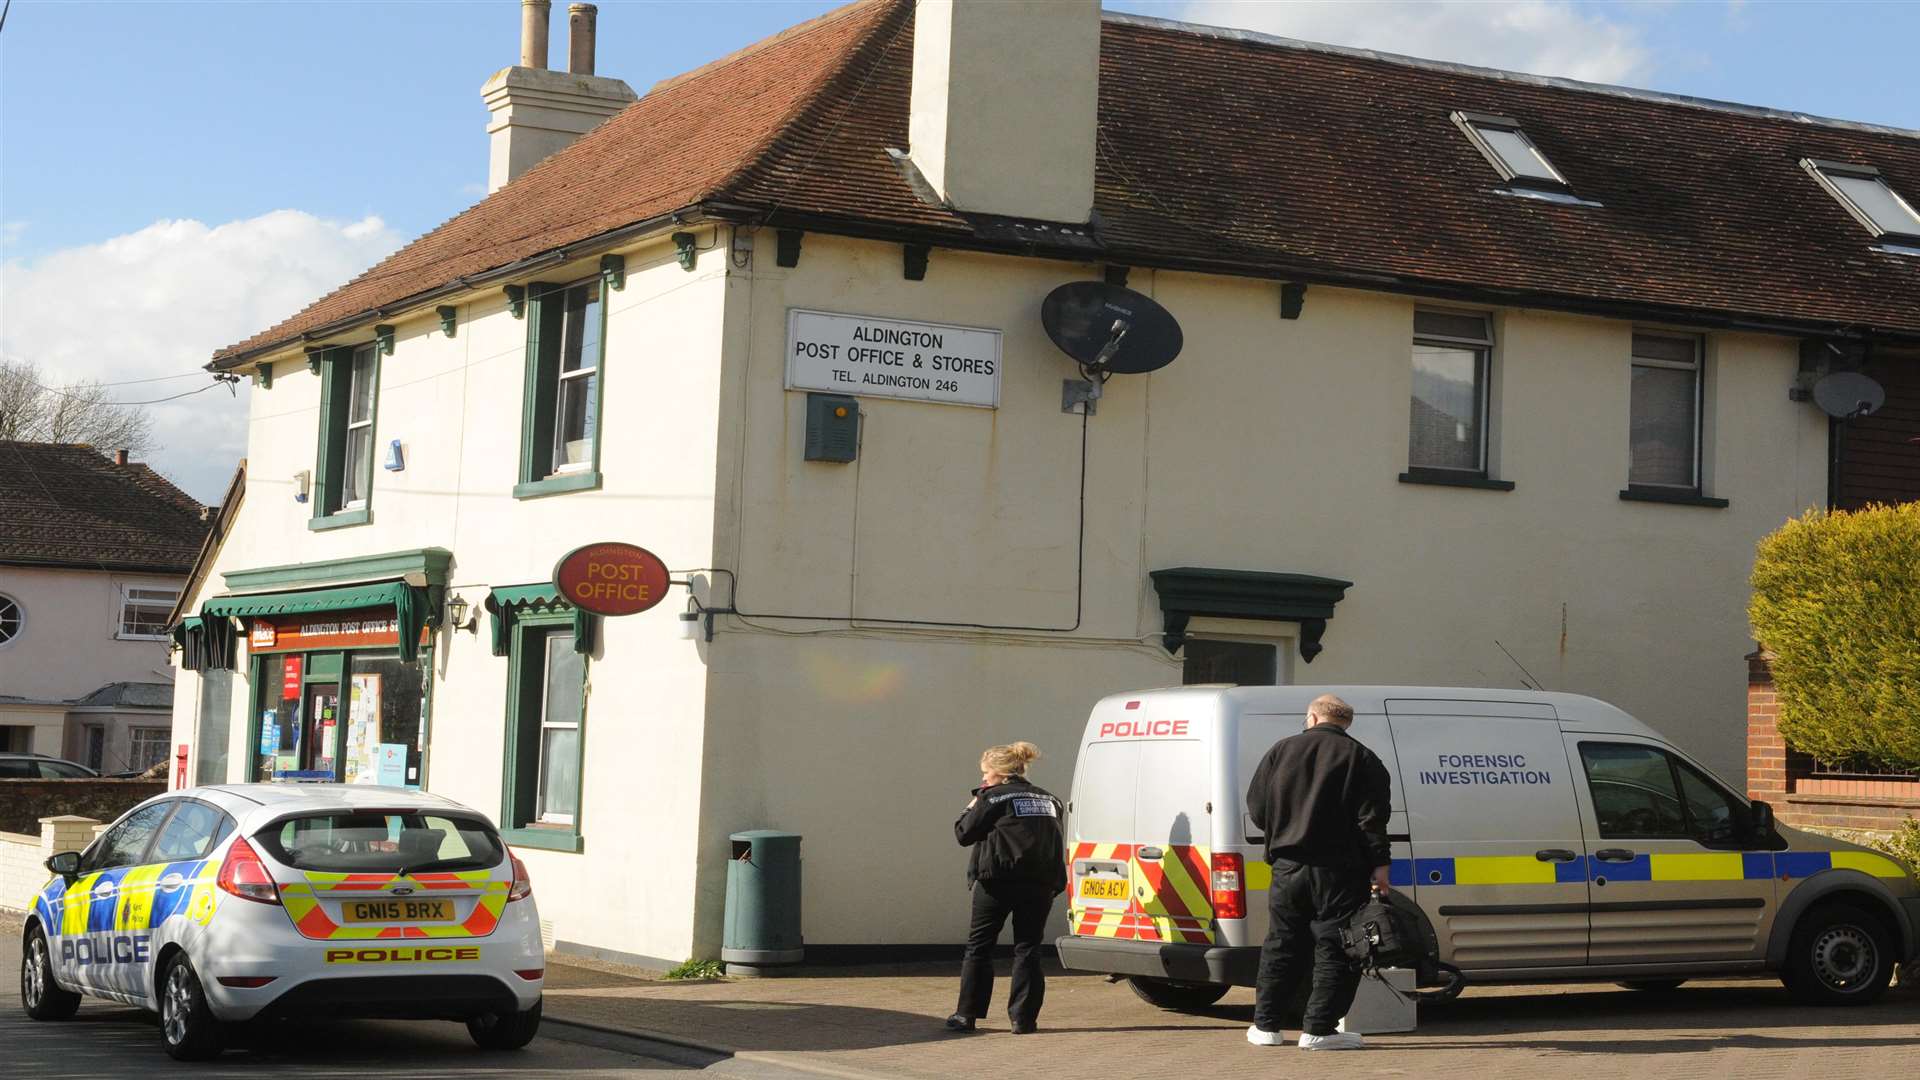 Police at the scene of the robbery at Aldington Post Office